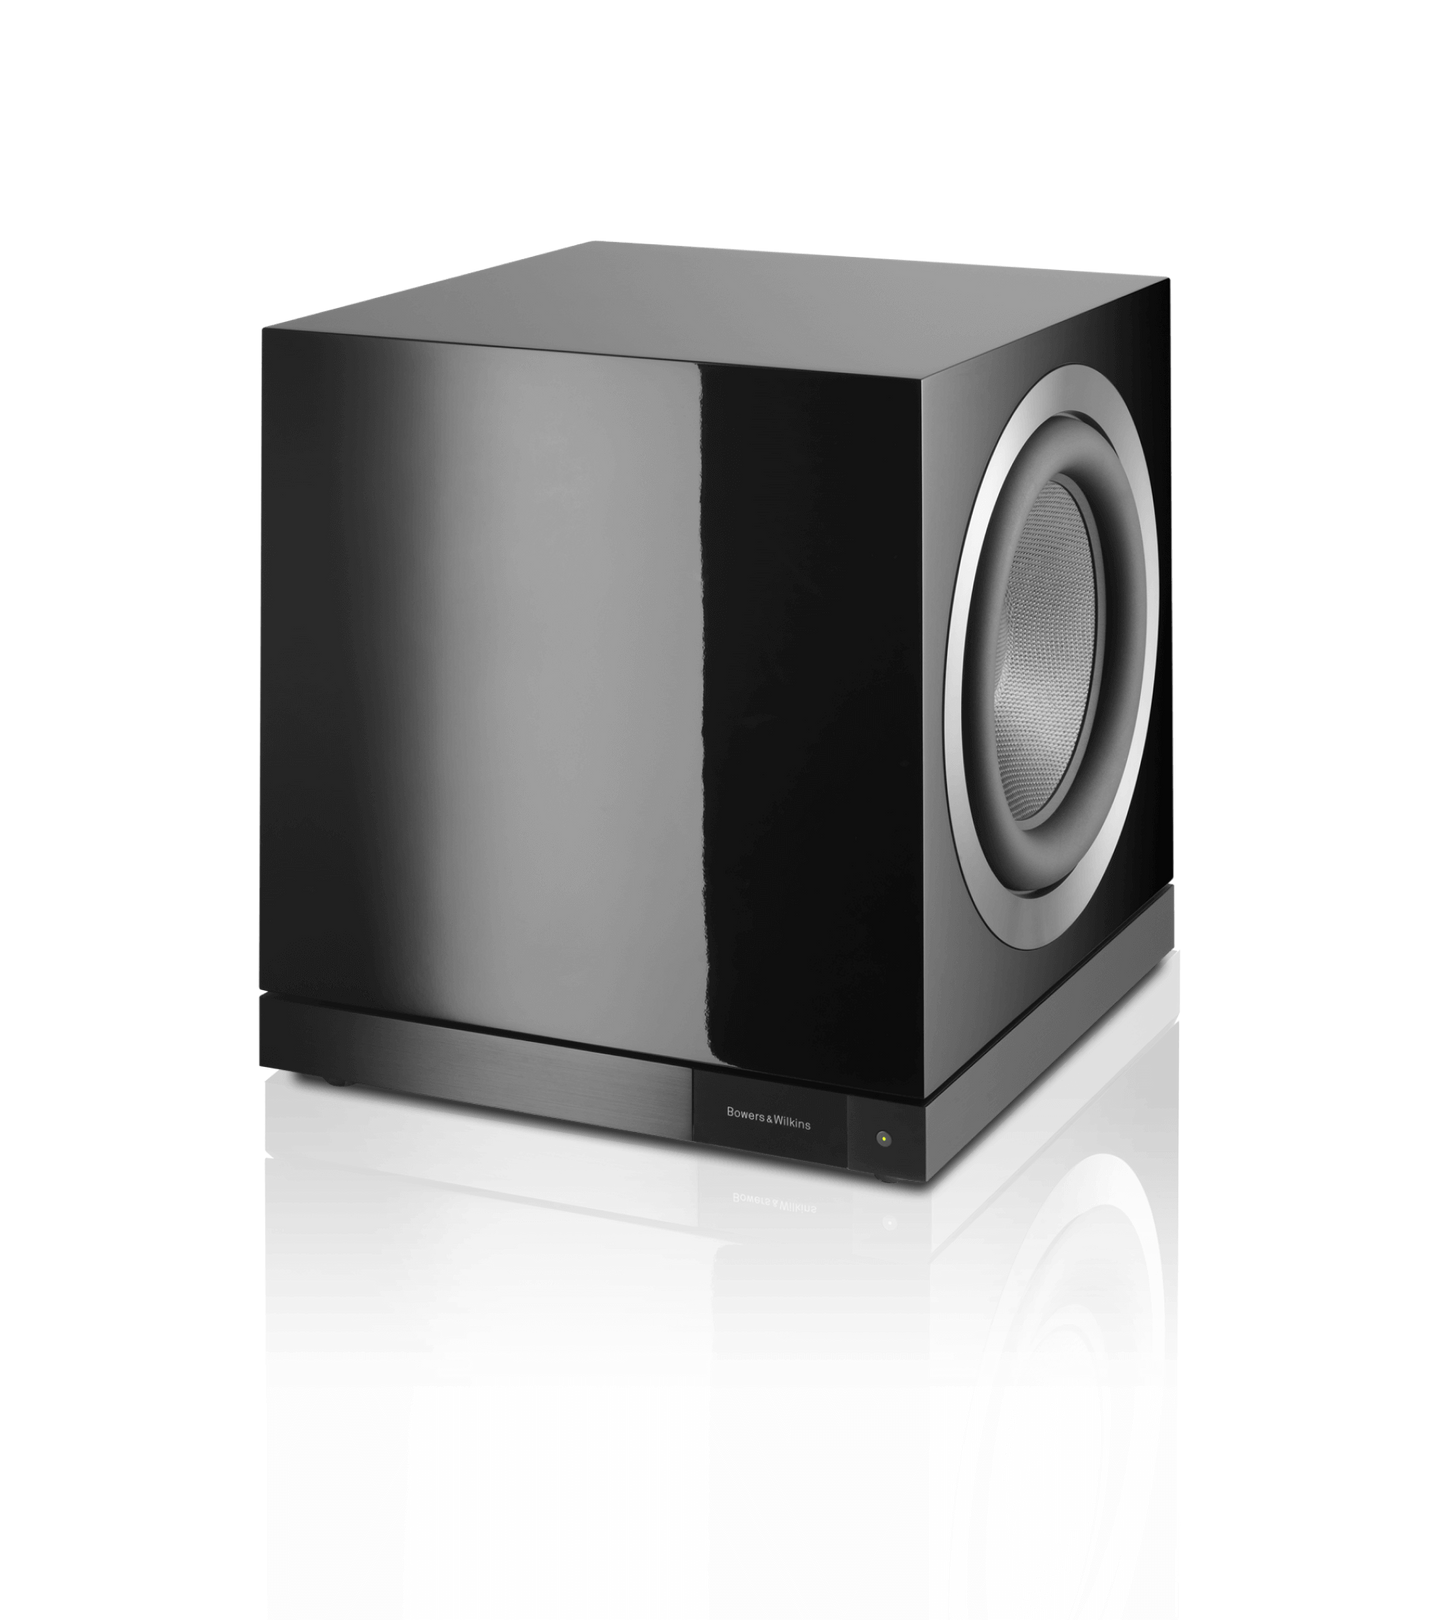 Combining 2000 watts of digital amplification with twin balanced Aerofoil™ drivers for incredible low-end power and speed, DB1D is the best Bowers & Wilkins subwoofer. Diamond bass Powerful amplification and ultra-fast Aerofoil™ drivers: a perfect partner for the acclaimed 800 Series Diamond speakers. 